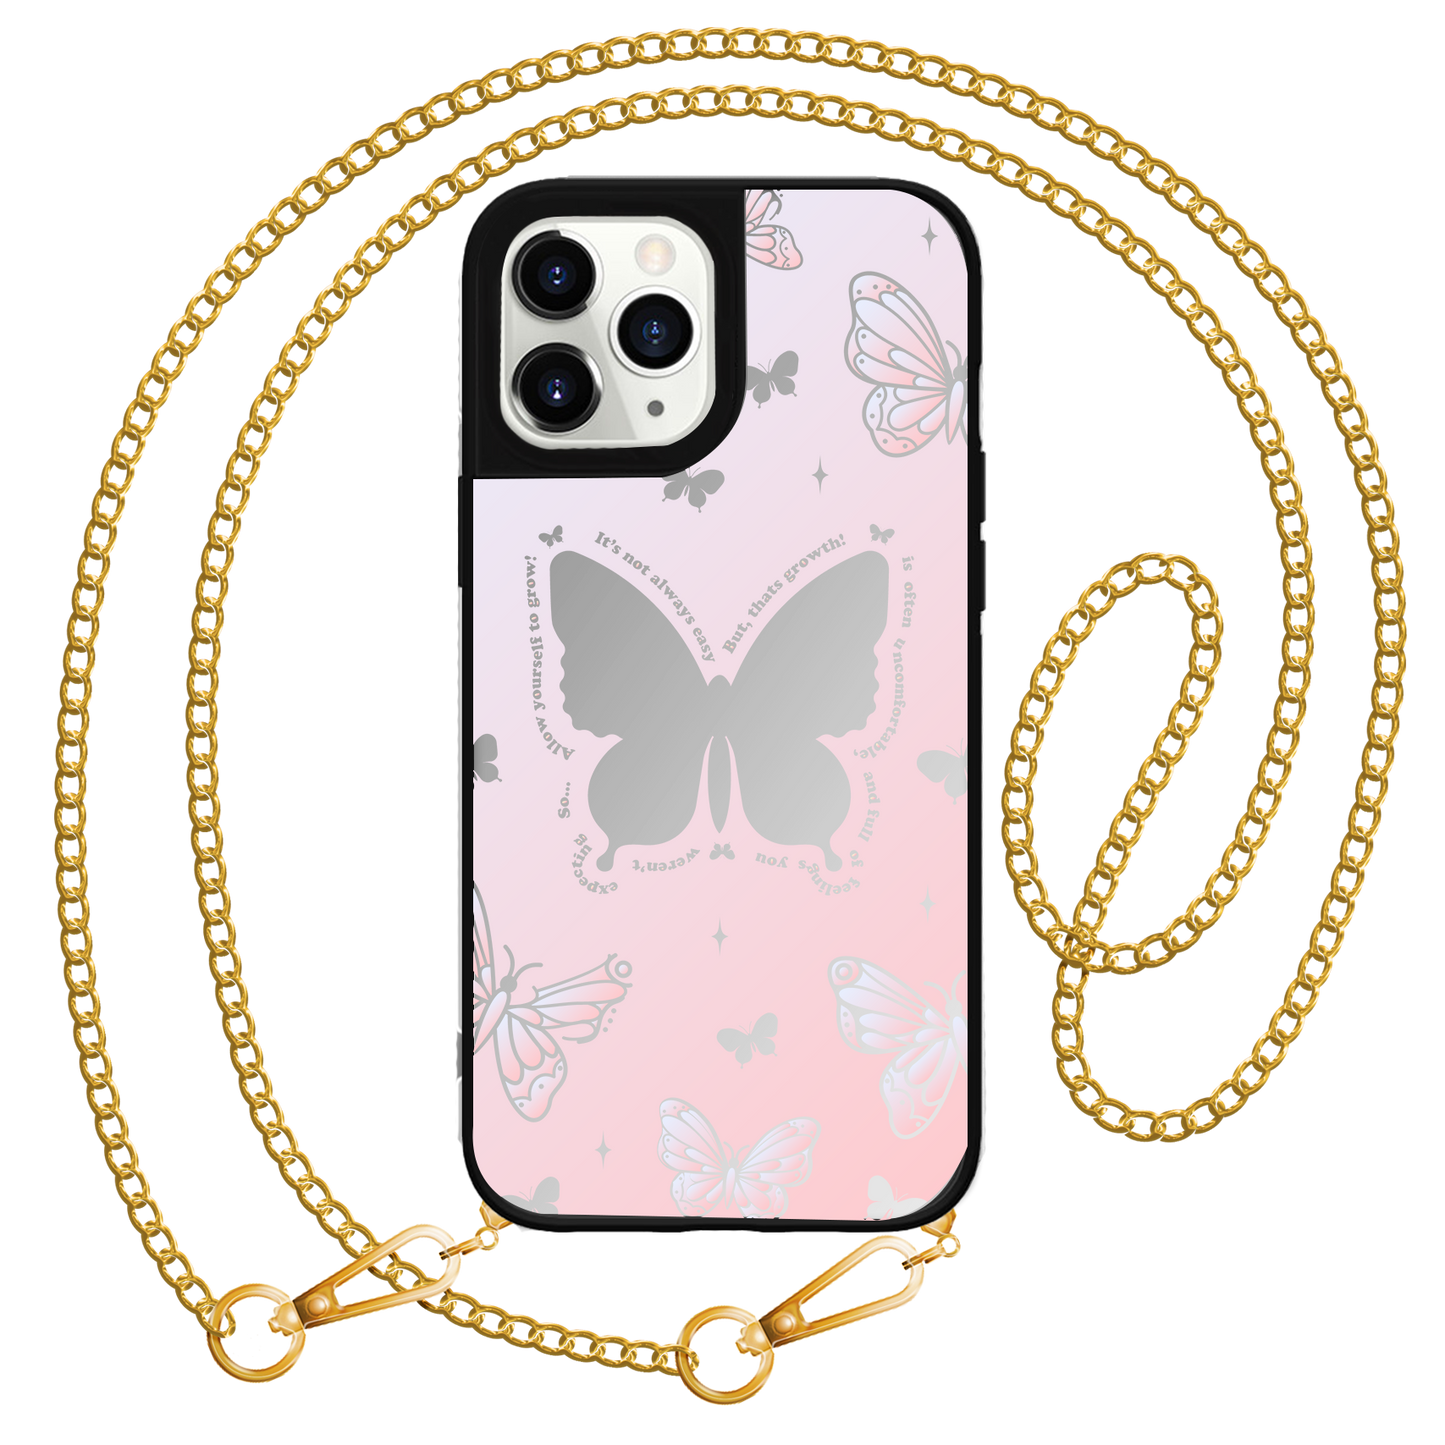 iPhone Mirror Grip Case -  Butterfly Effect 2.0